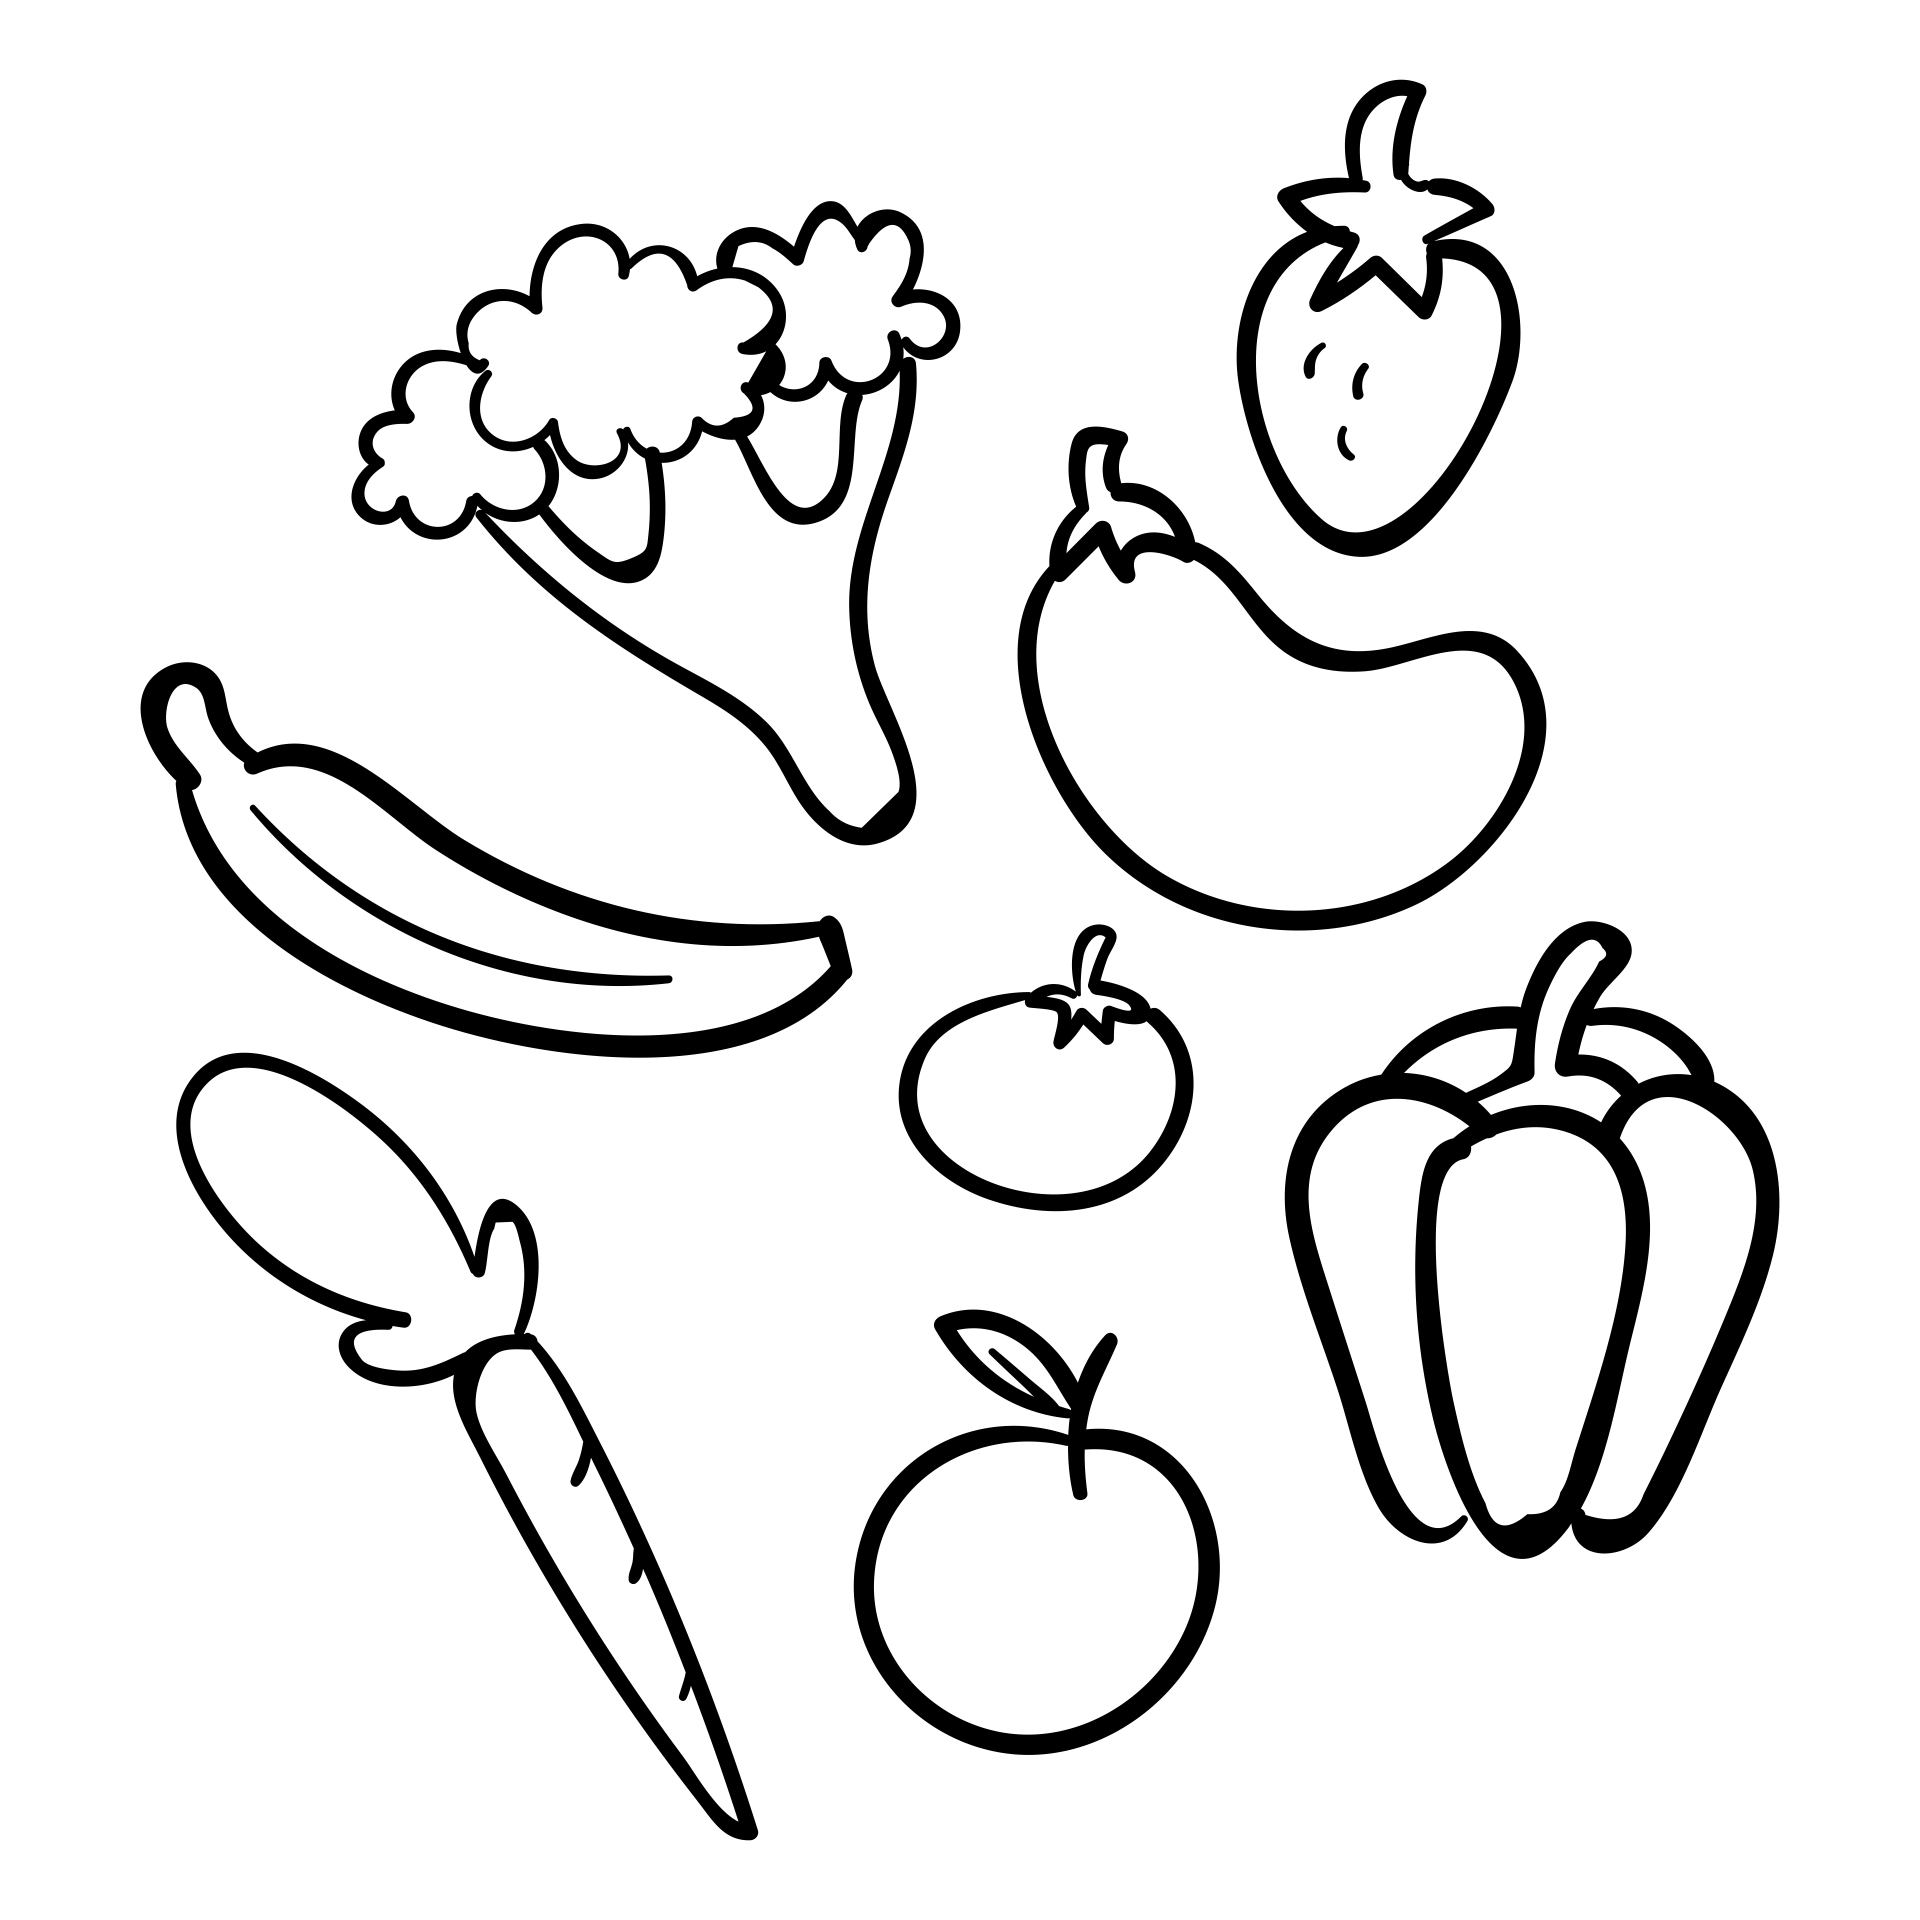 Templates For Fruits And Vegetables